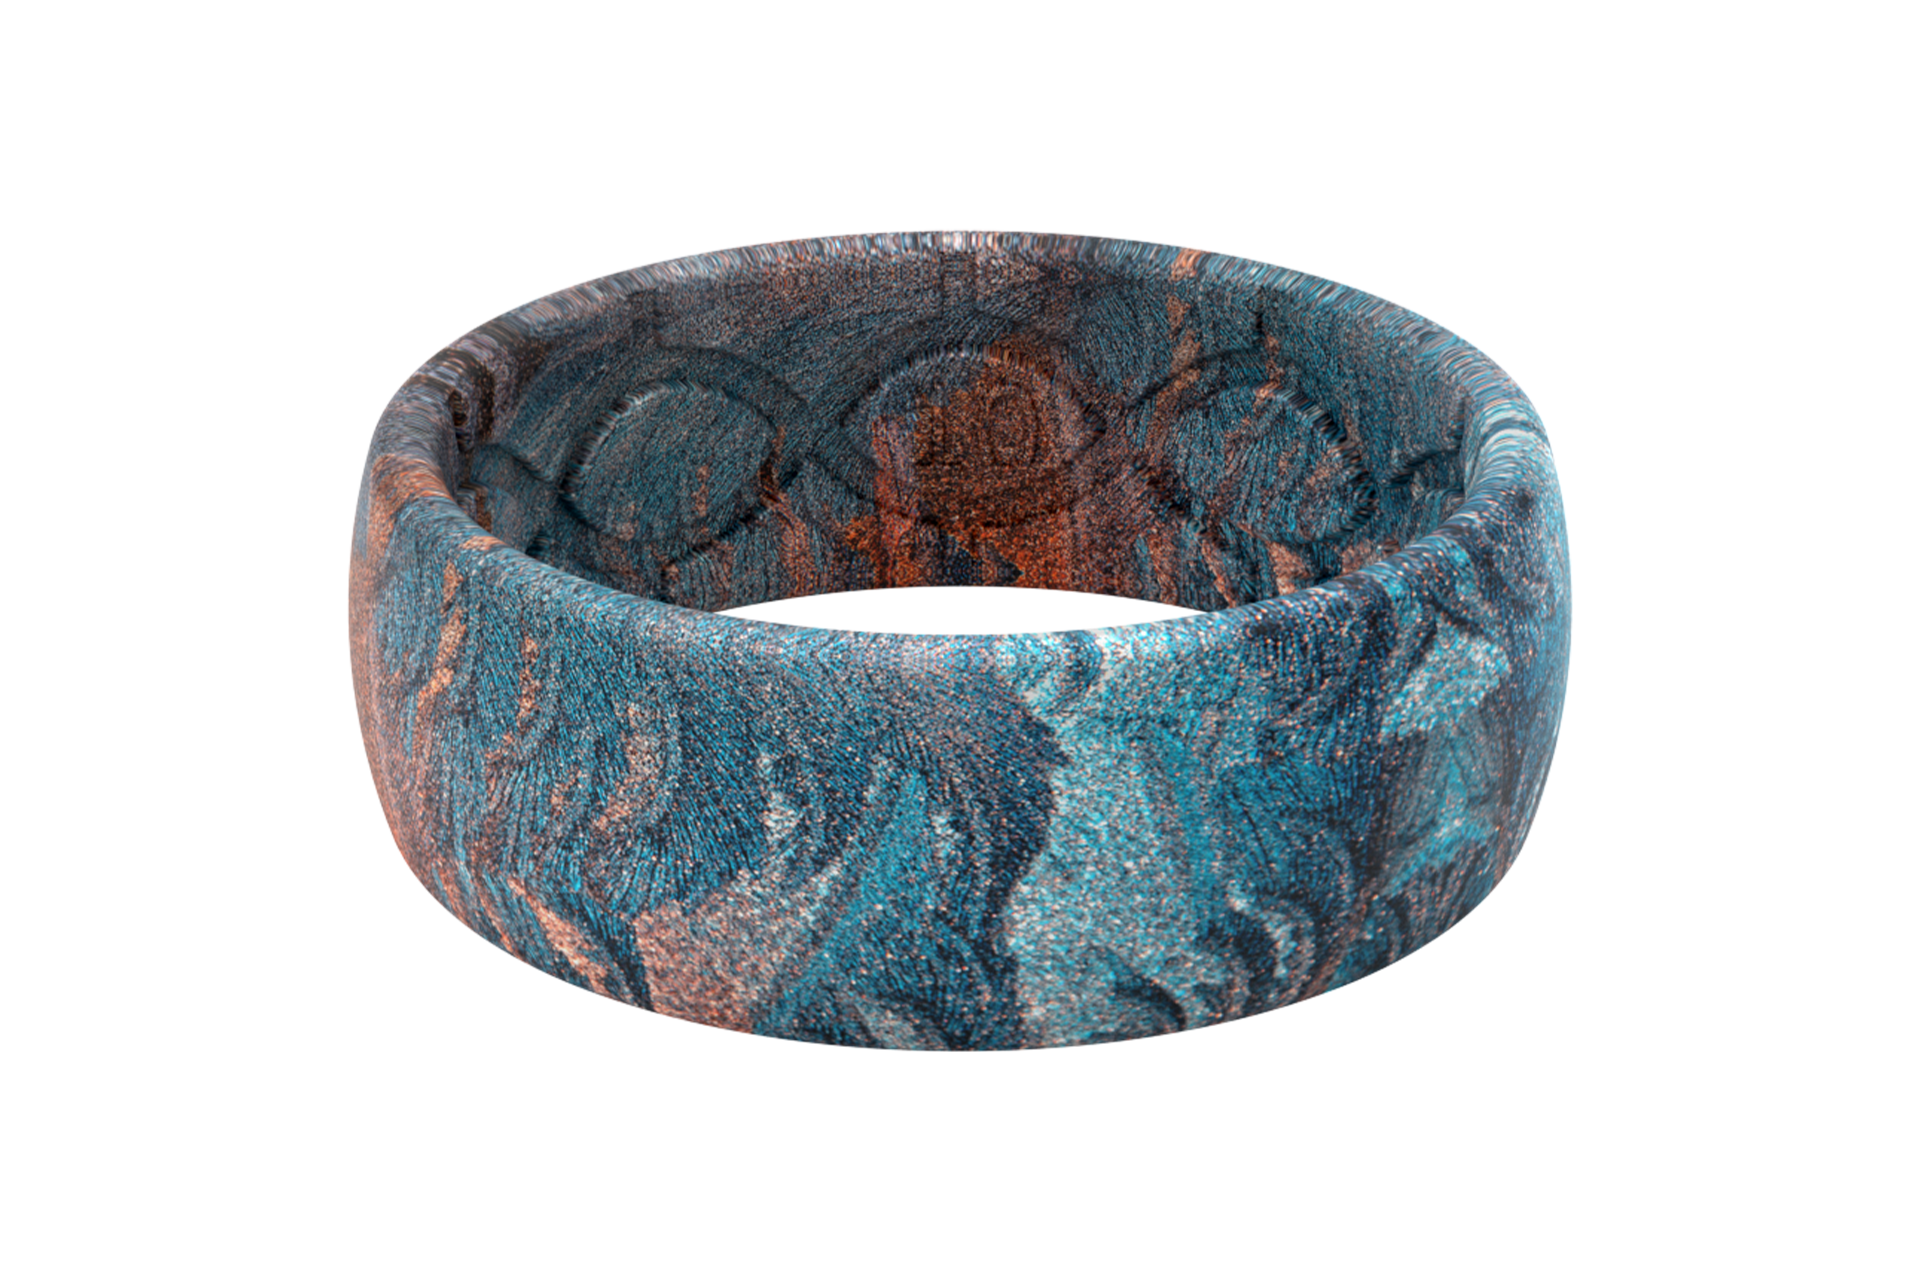 nomad cobalt ring view 1 PNG